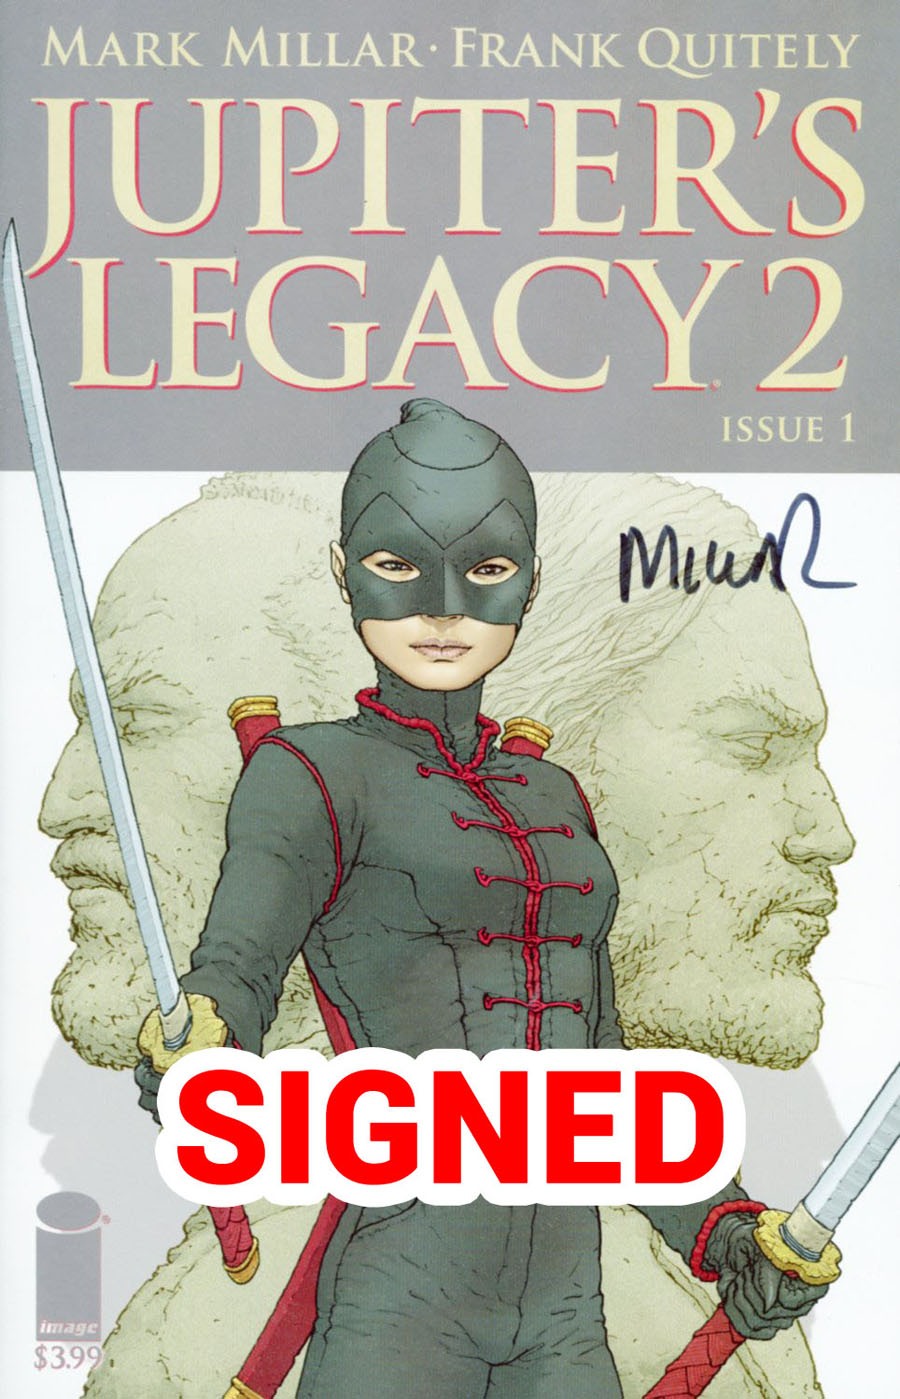 Jupiters Legacy Vol 2 #1 Cover H Regular Frank Quitely Cover Signed By Mark Millar (Limit 1 Per Customer)